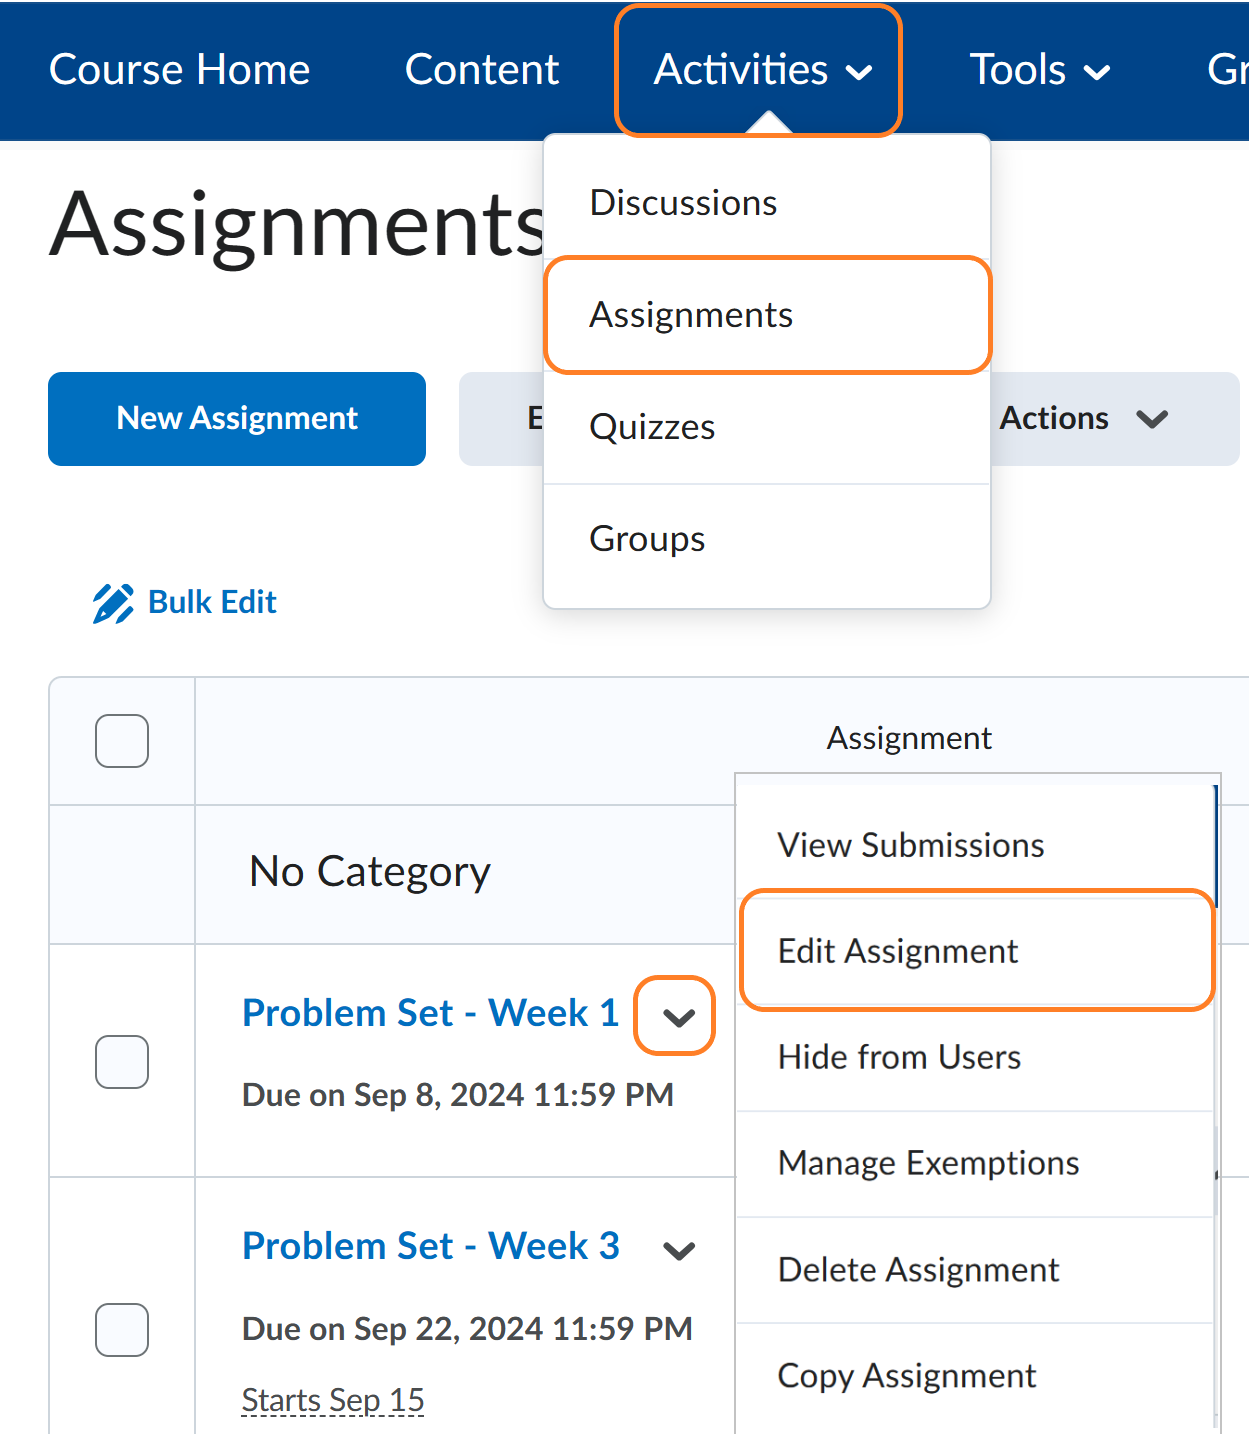 grading assignments in brightspace